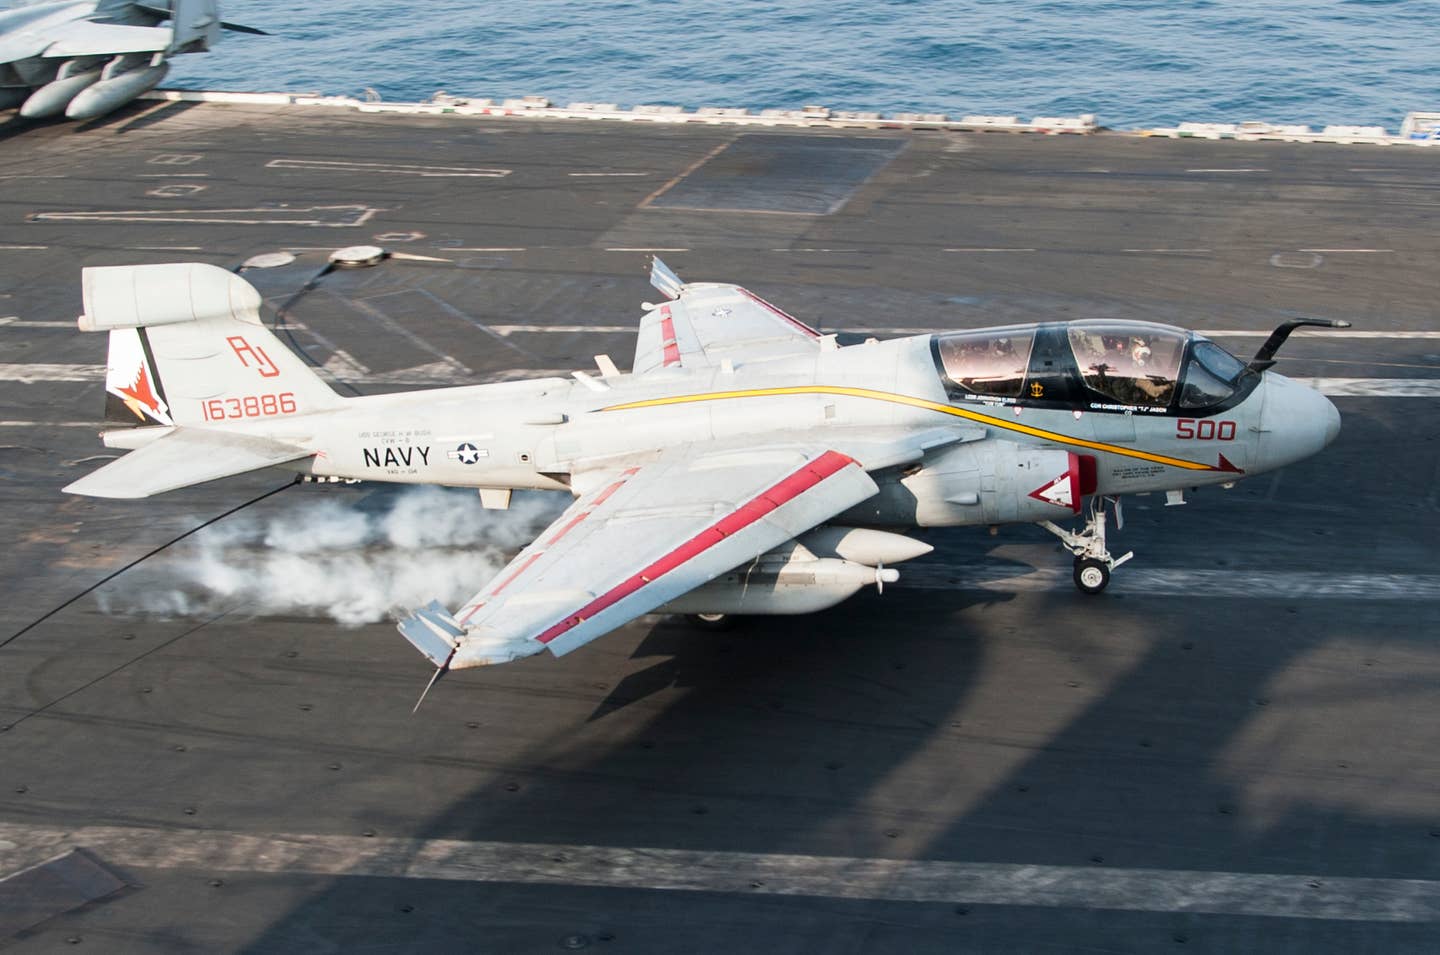 An EA-6B Prowler assigned to the Garudas of Electronic Attack Squadron (VAQ) 134 lands on the flight deck of the aircraft carrier USS George H.W. Bush (CVN 77). (U.S. Navy photo by Mass Communication Specialist 3rd Class Brian Stephens)